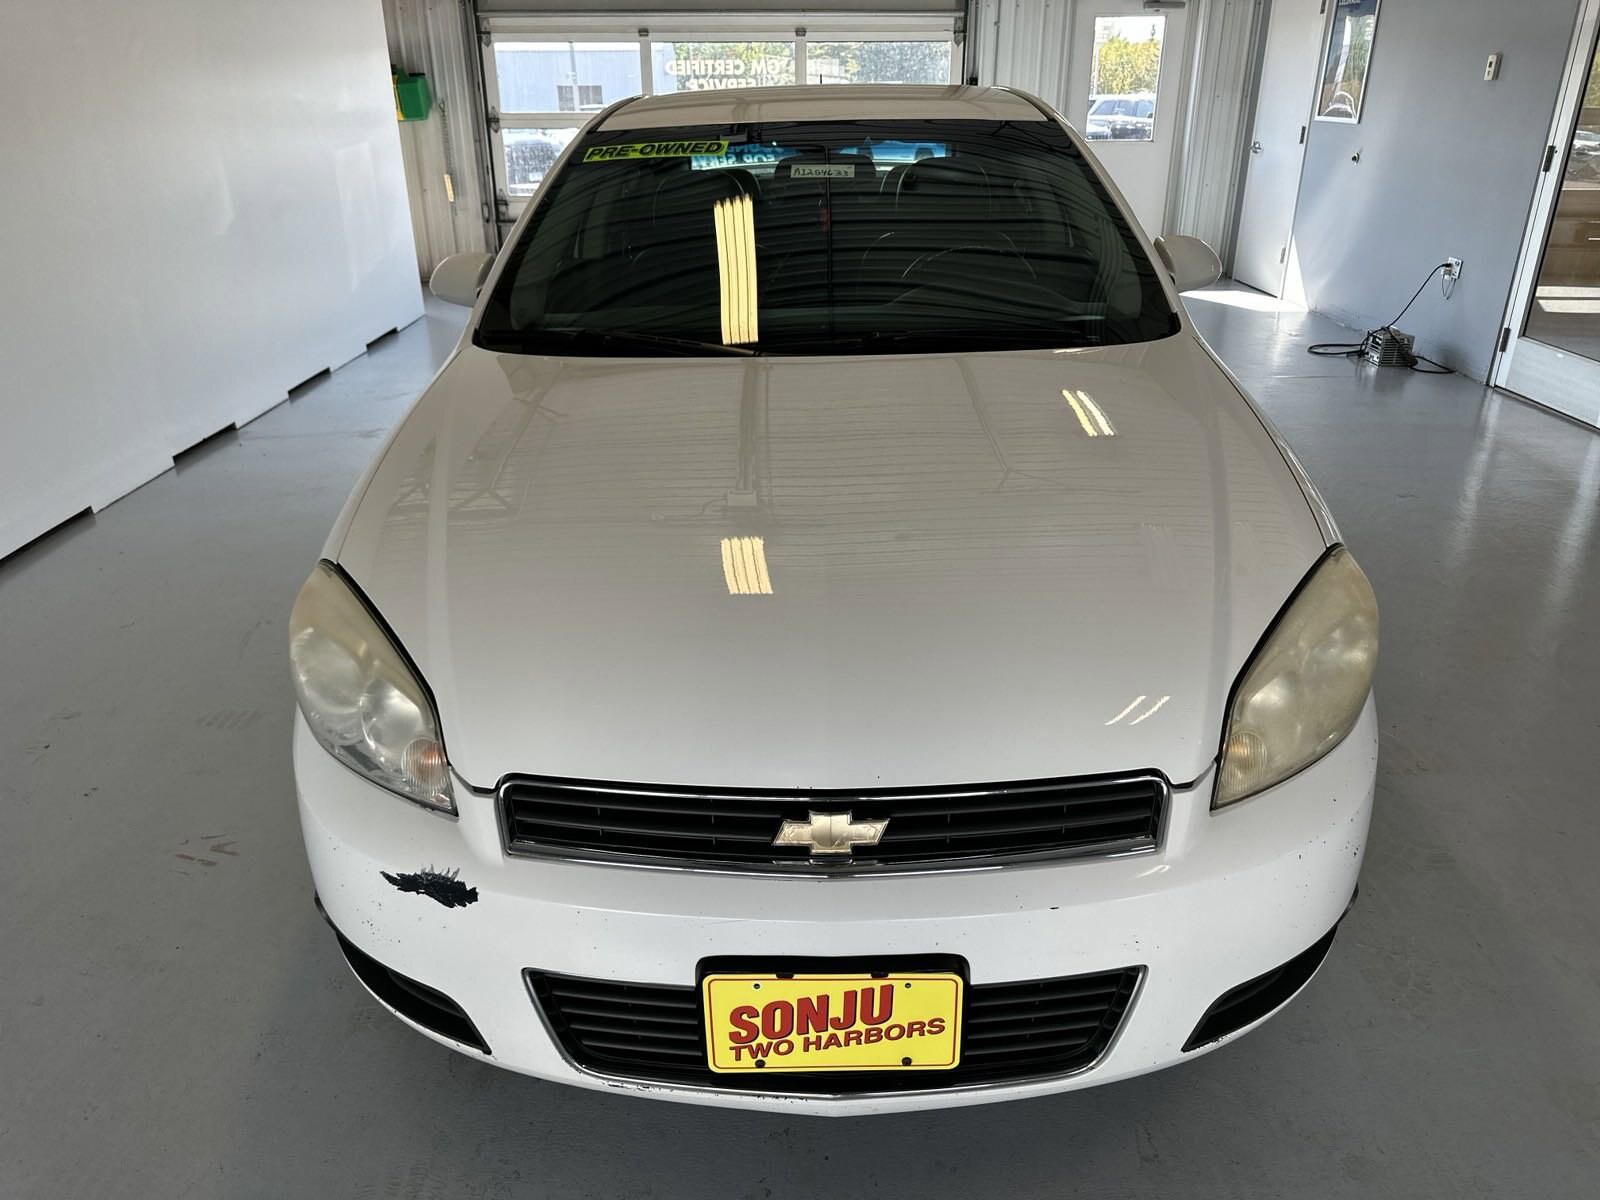 Used 2010 Chevrolet Impala LT with VIN 2G1WB5EKXA1254633 for sale in Two Harbors, Minnesota